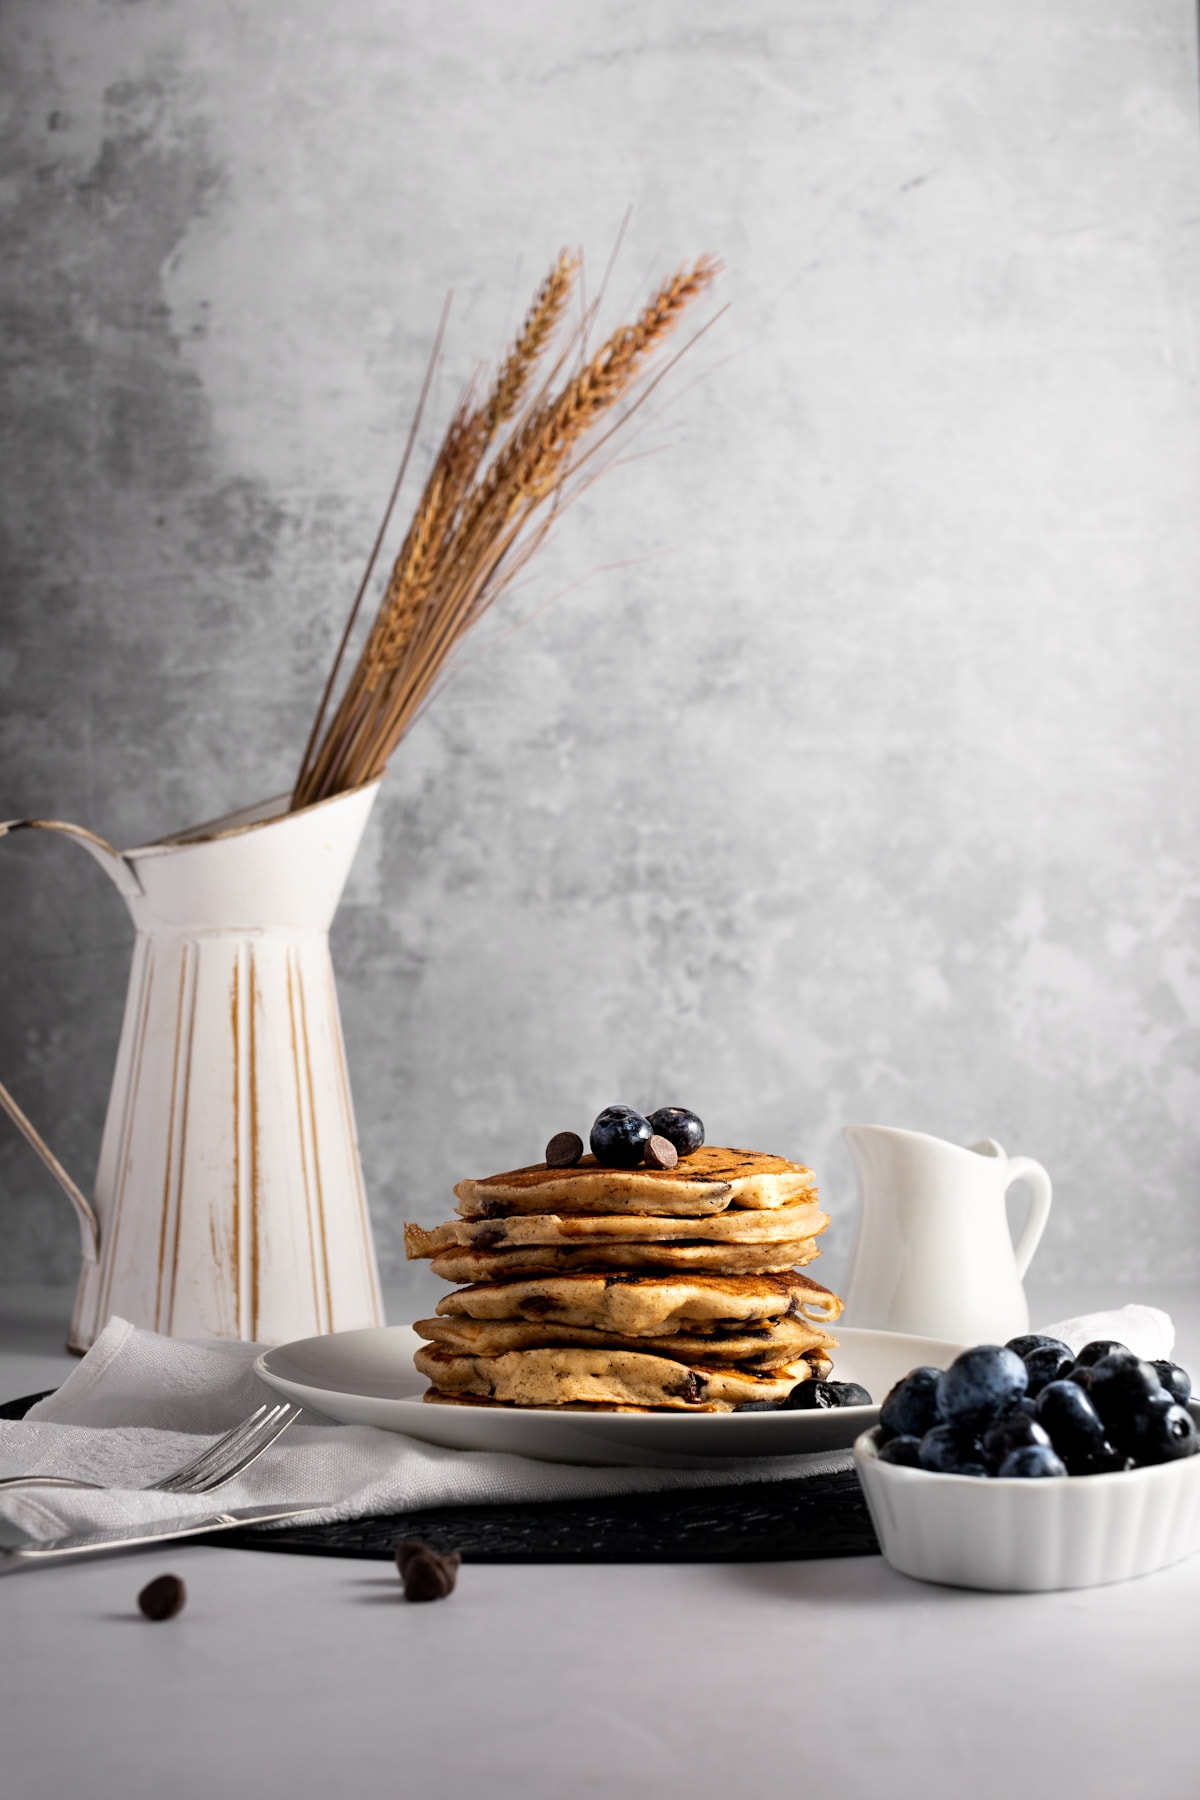 A stack of pancakes make with oat milk on a white plate, next to a white dish filled with fresh blueberries, a container with maple syrup and a rustic just with wheat.